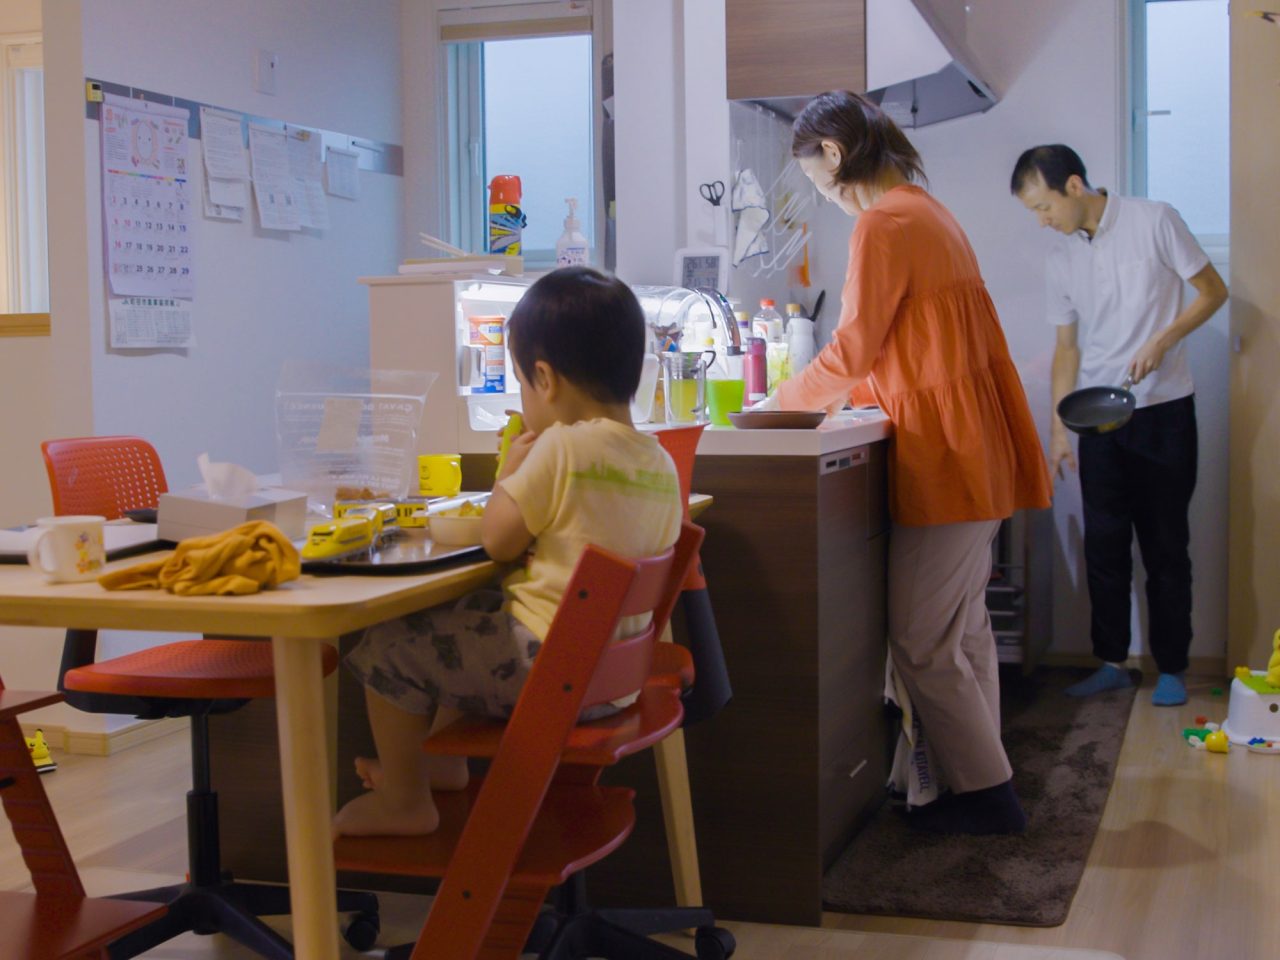 Small child sitting at a dining table in a kitchen, a woman and a man washing and clearing away behind him.